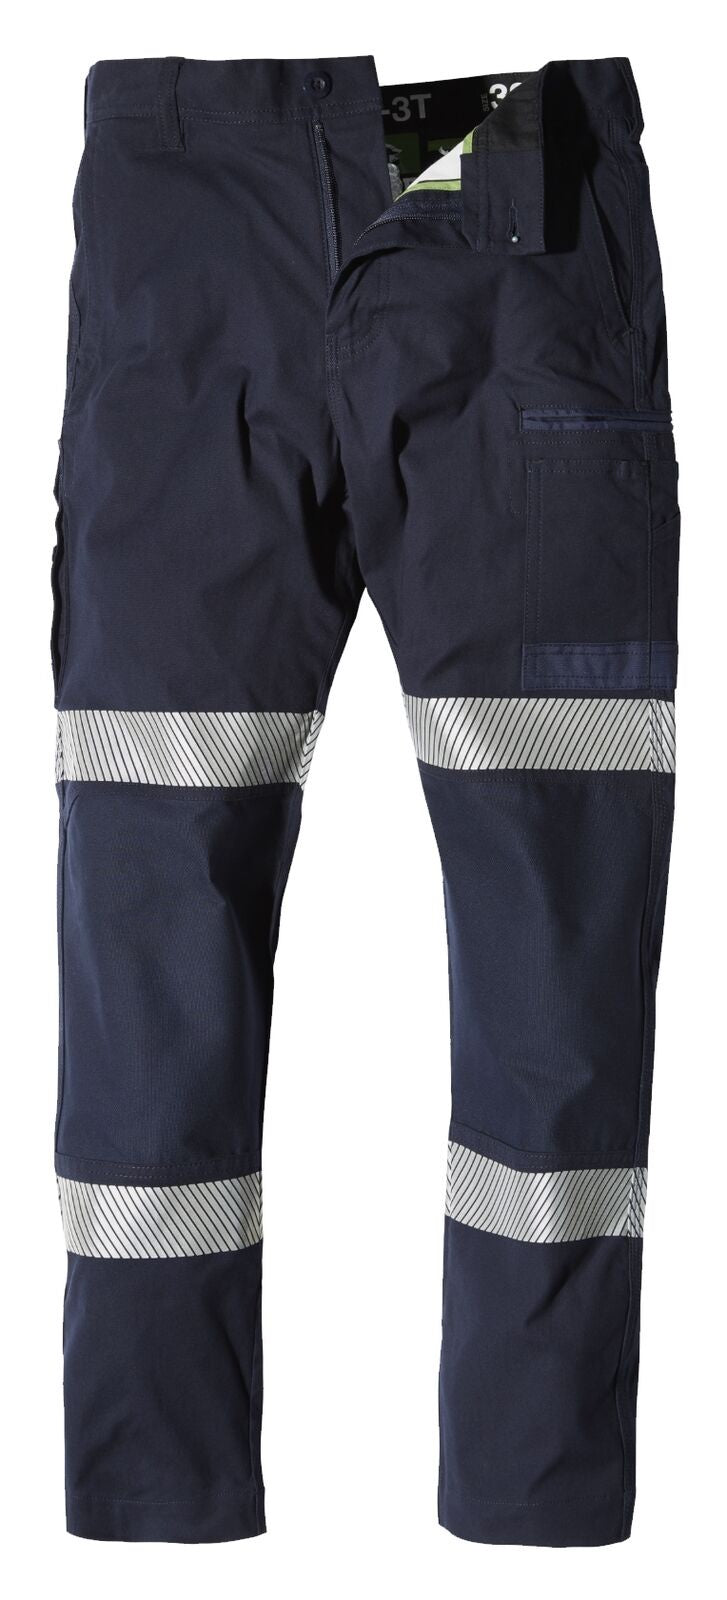 WP-3T TAPED STRETCH PANT FXD